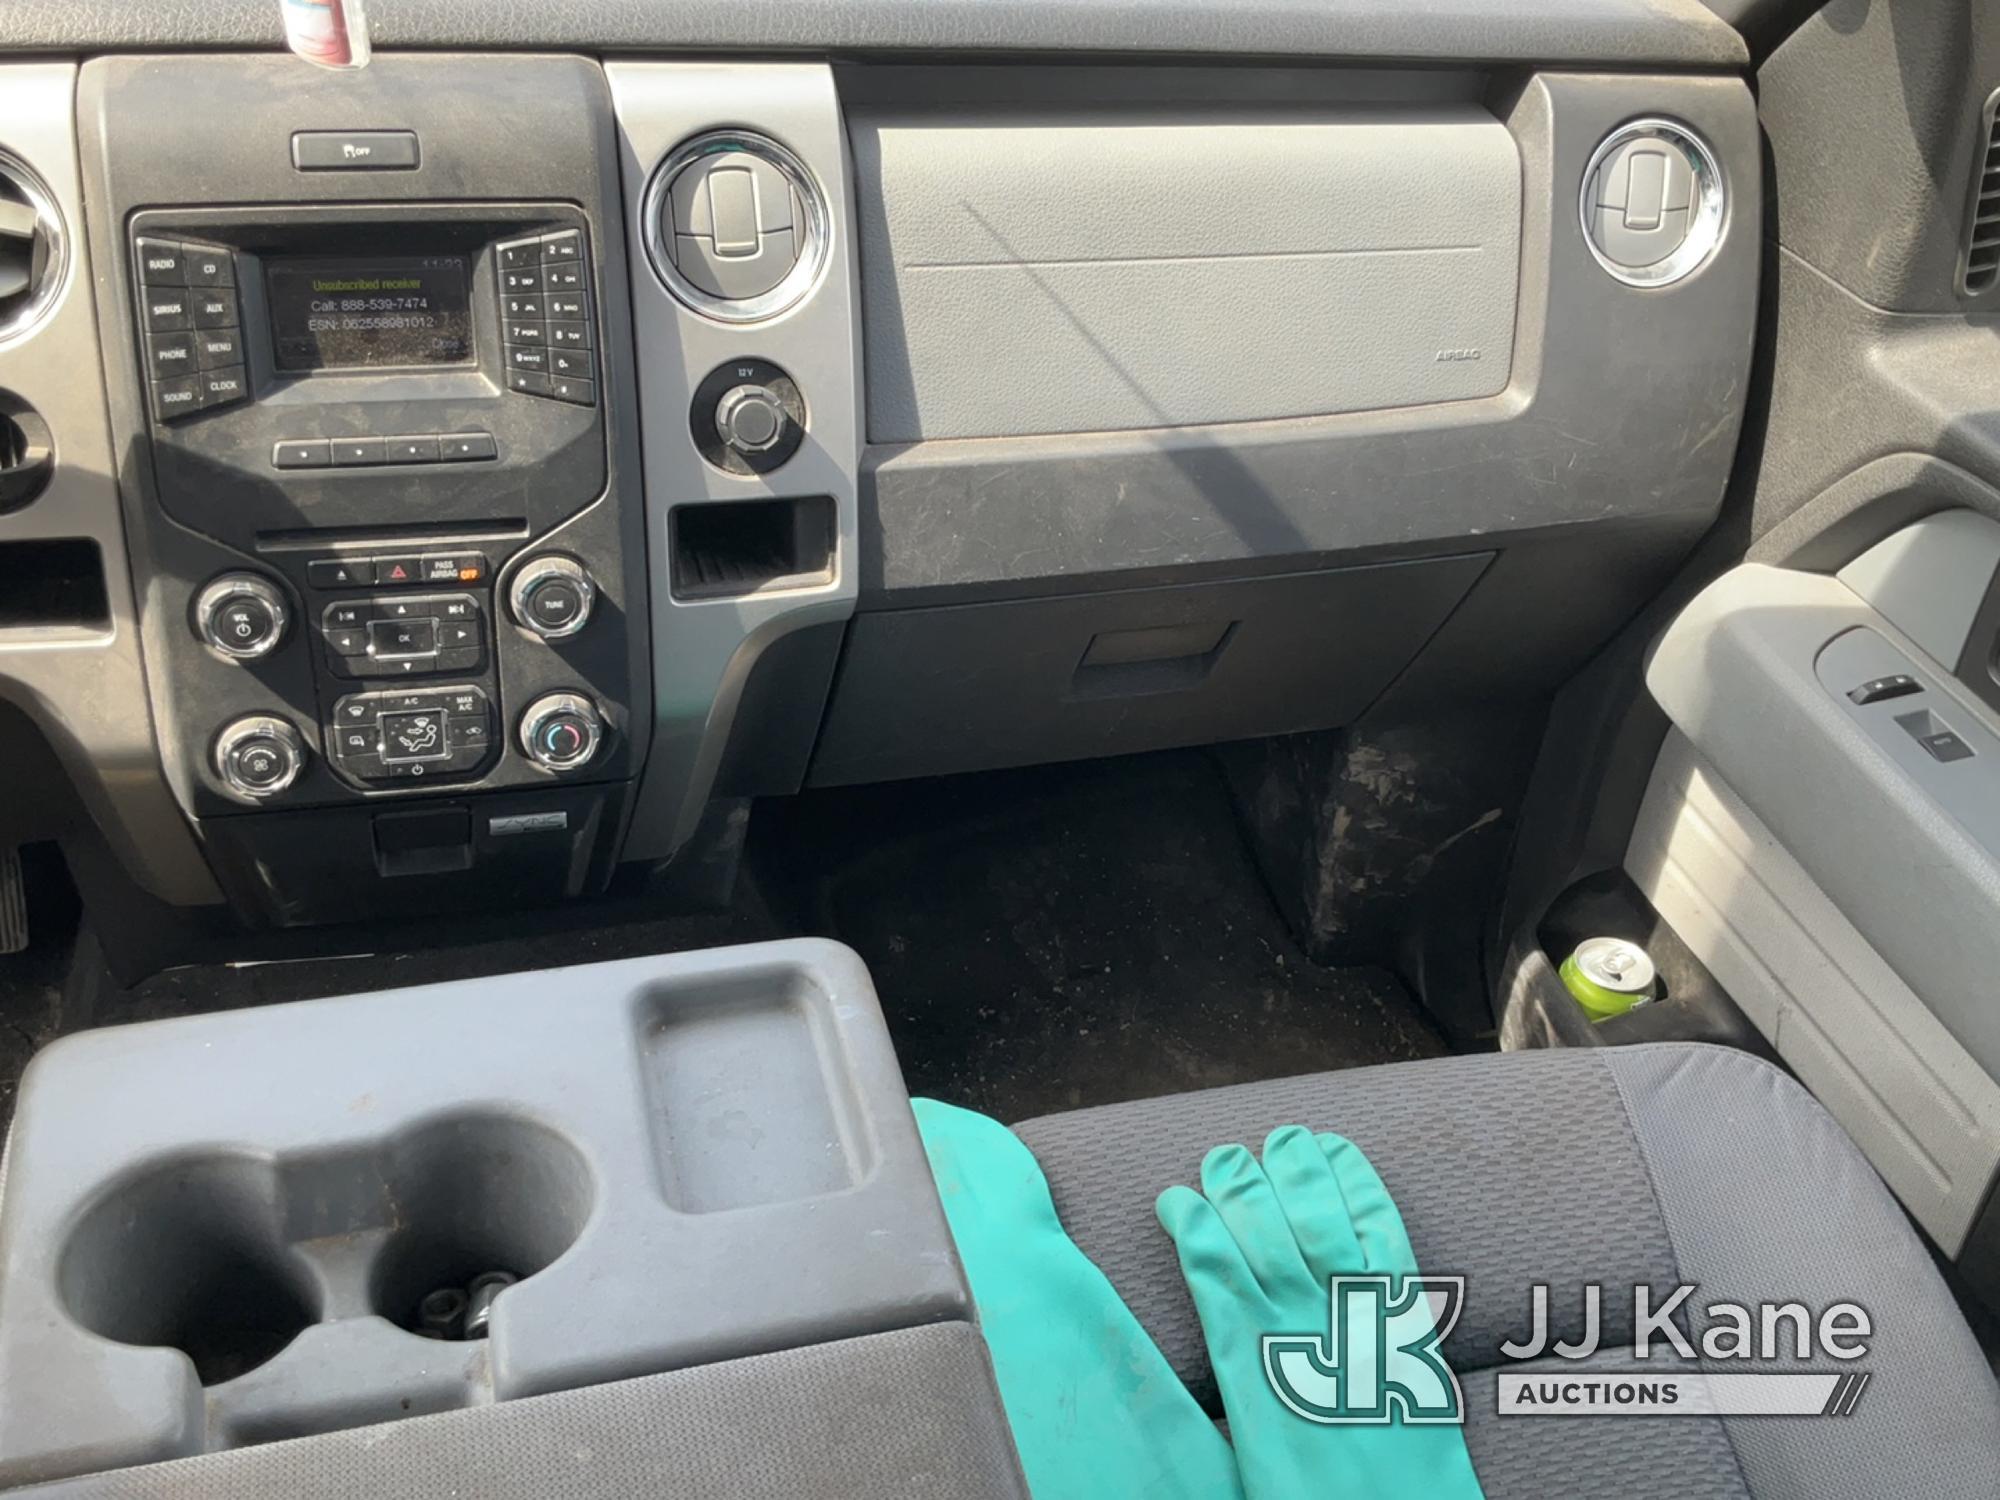 (South Beloit, IL) 2014 Ford F150 Extended-Cab Pickup Truck Runs, Moves, Airbag Light On, Check Engi